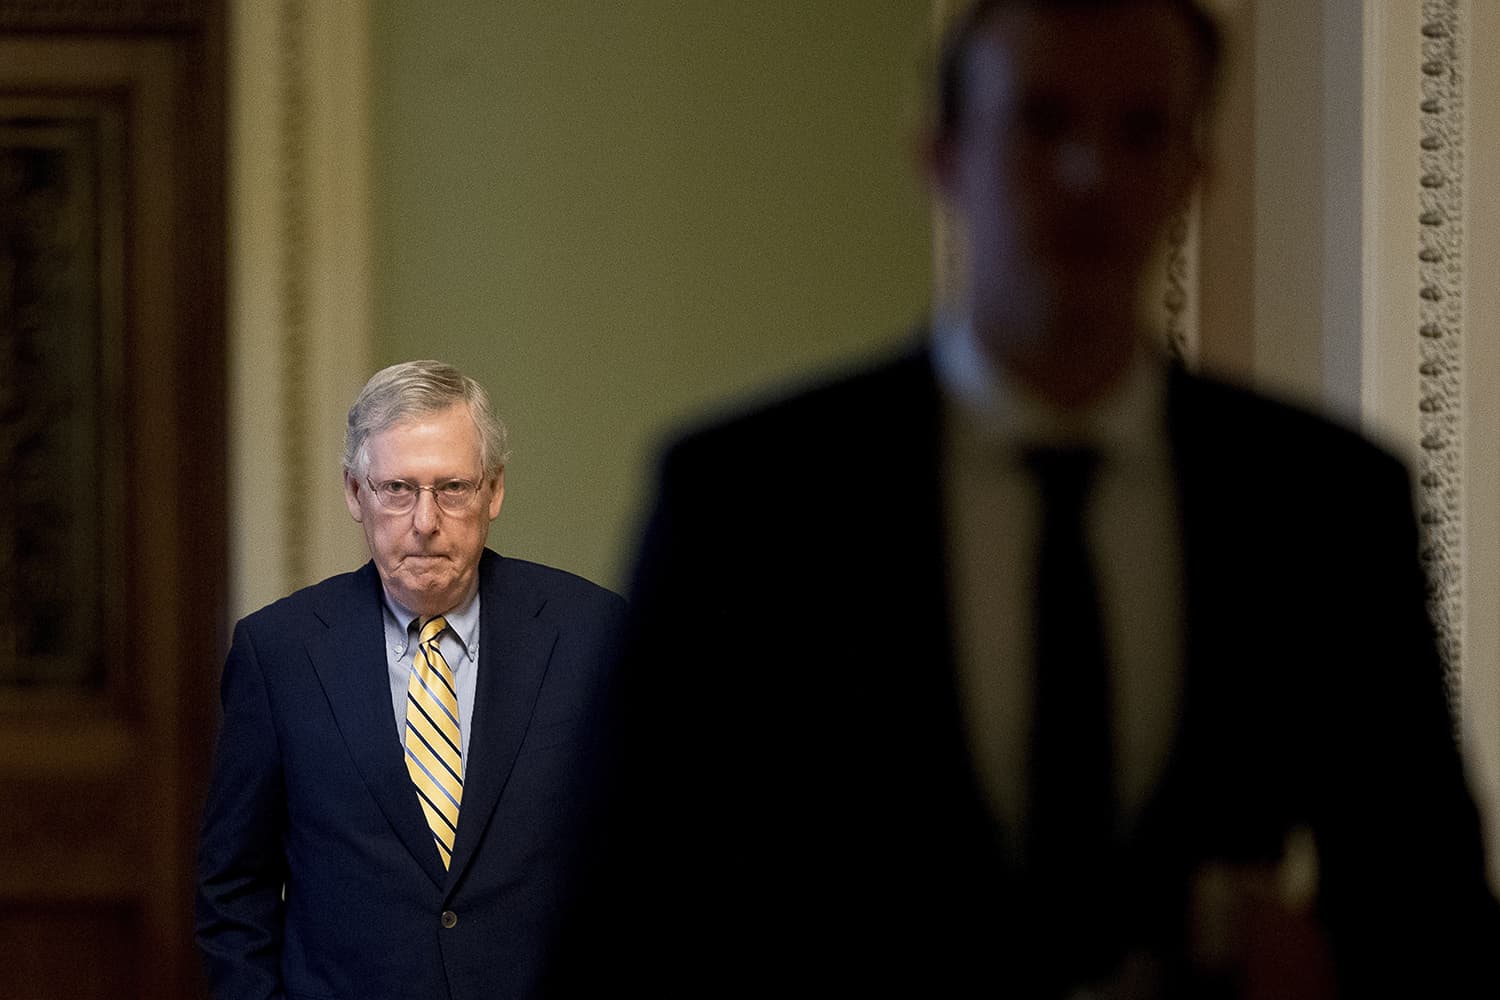 Senate Majority Leader Mitch McConnell of Ky. arrives on Capitol Hill in Washington, Monday, July 17, 2017. (Andrew Harnik/AP)